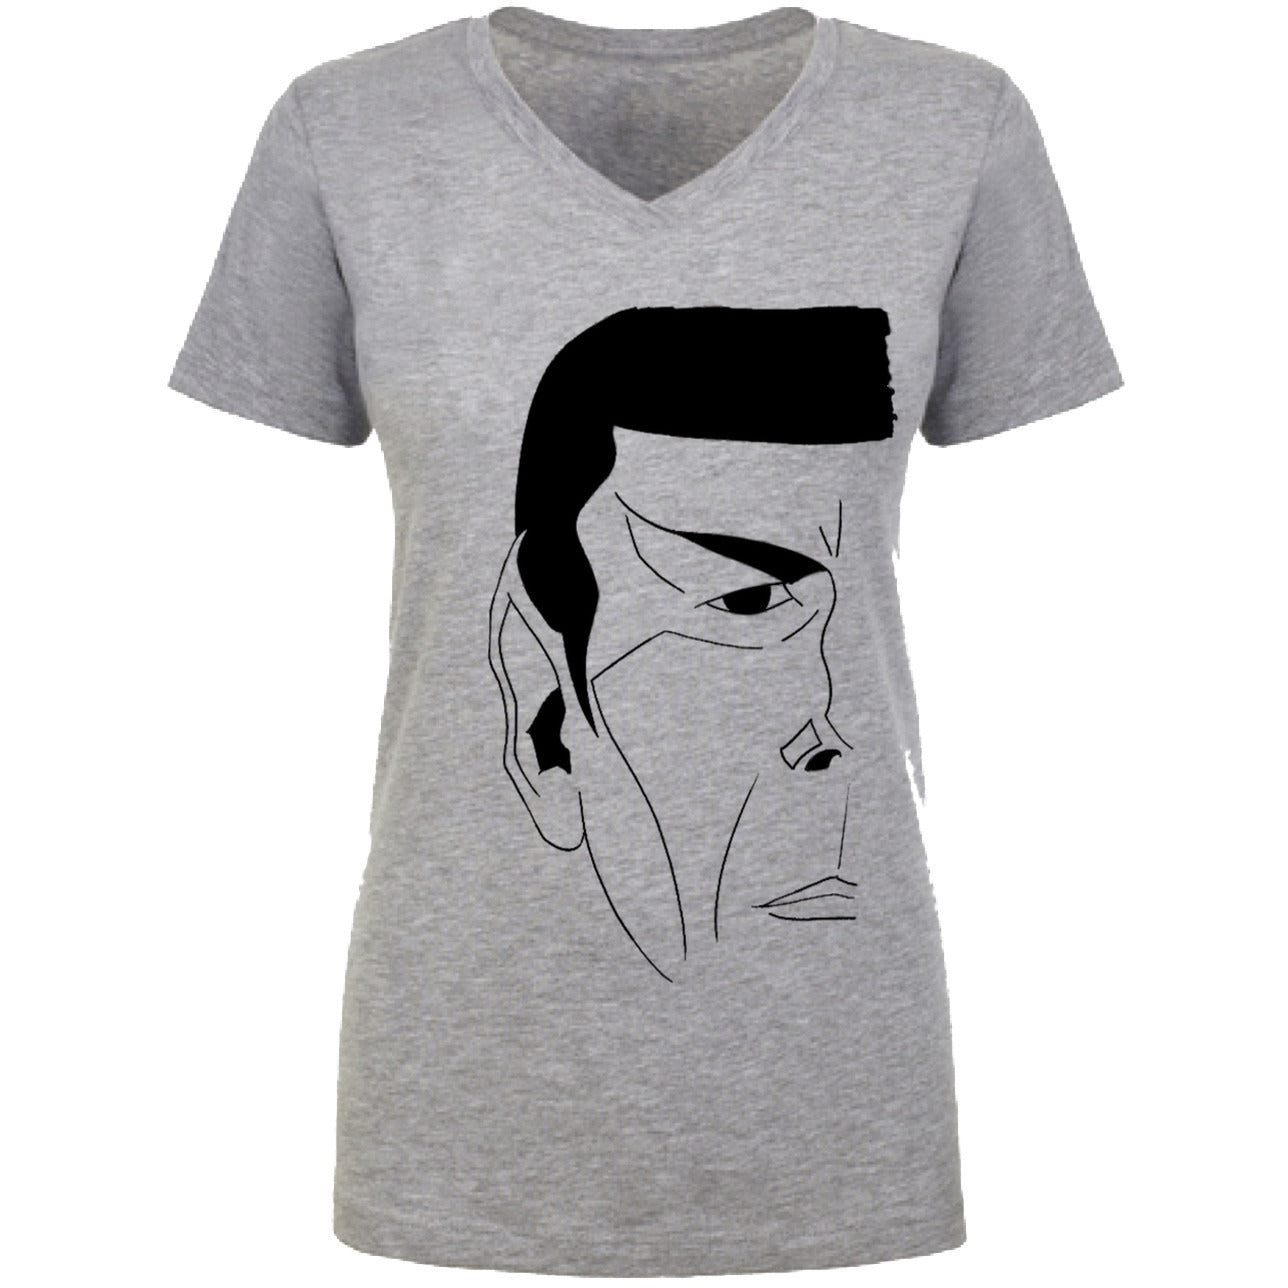 "The Vulcan" V-Neck Tee in Heather Grey - Unisex and Ladies Sizes - Leonard Nimoy's Shop LLAP